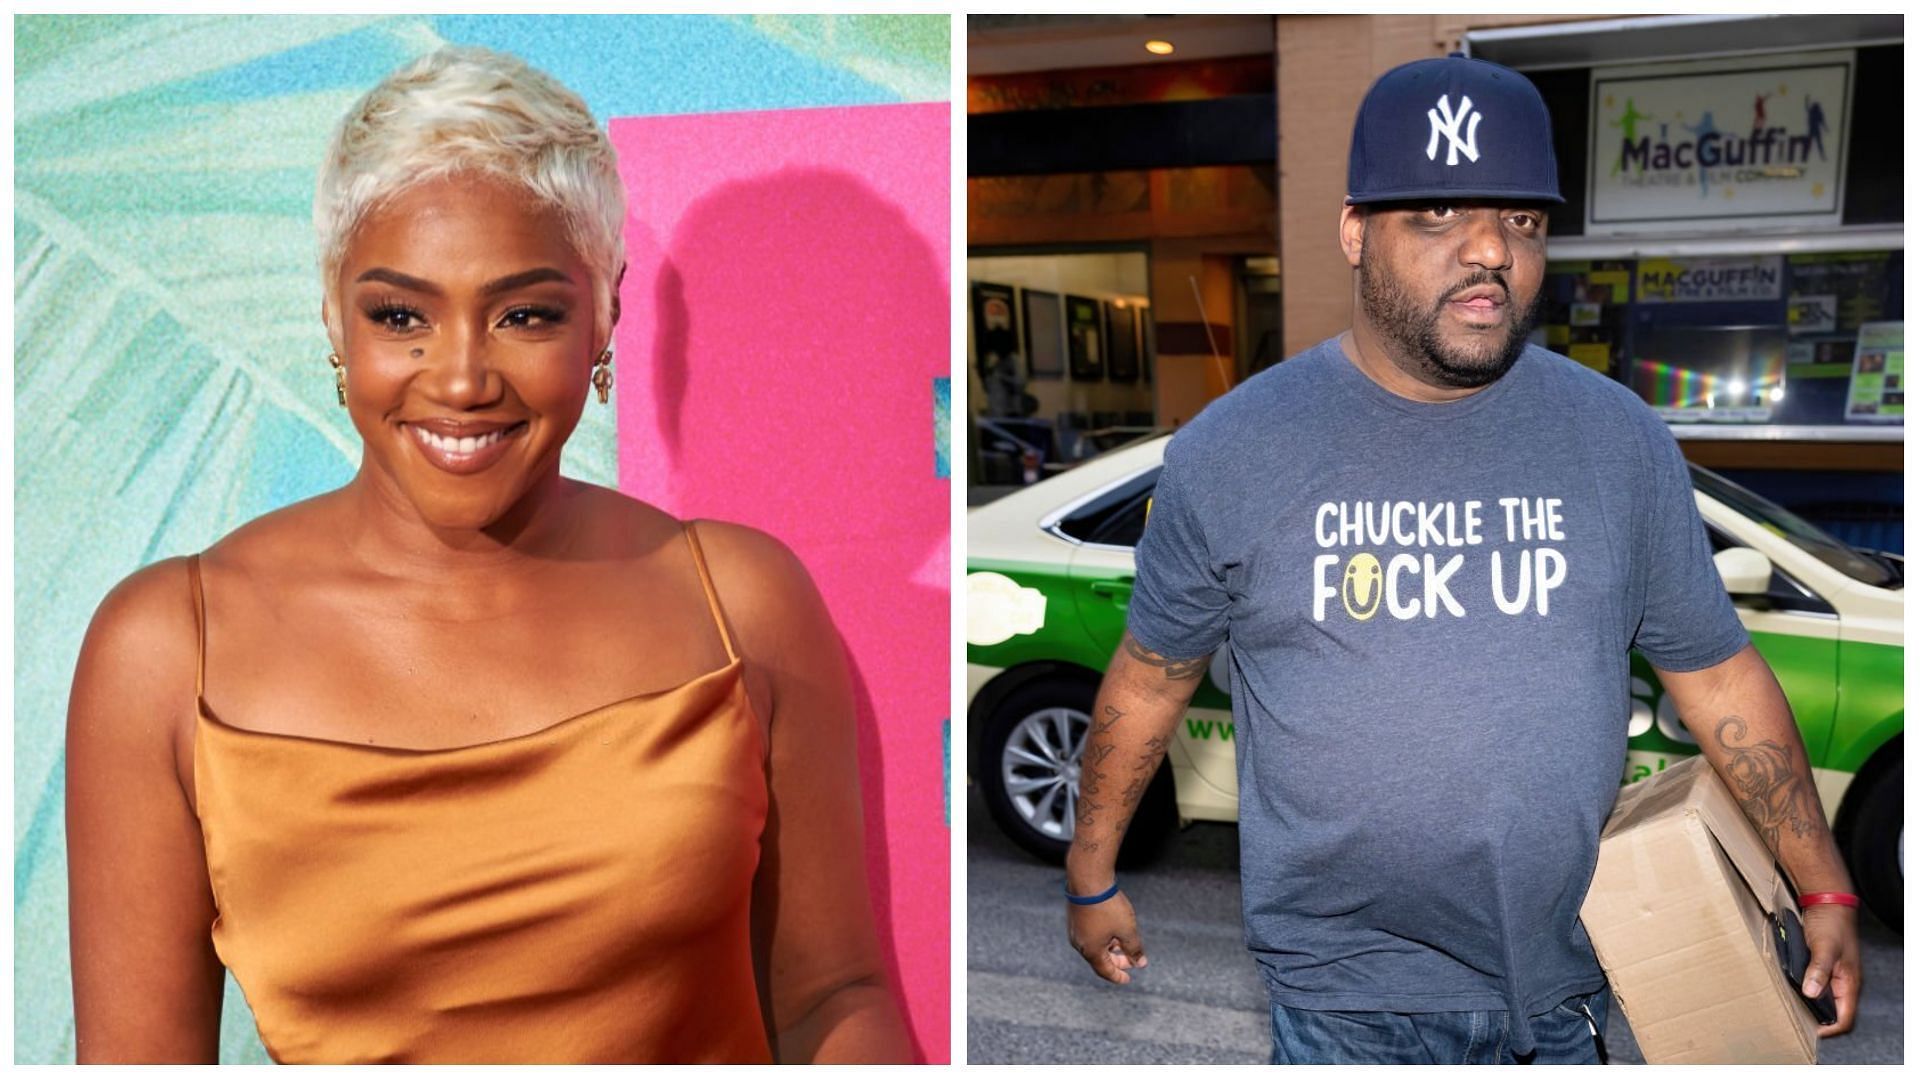 Tiffany Haddish and Aries Spears have been accused of child abuse (Images via Unique Nicole and Gilbert Carrasquillo/Getty Images)